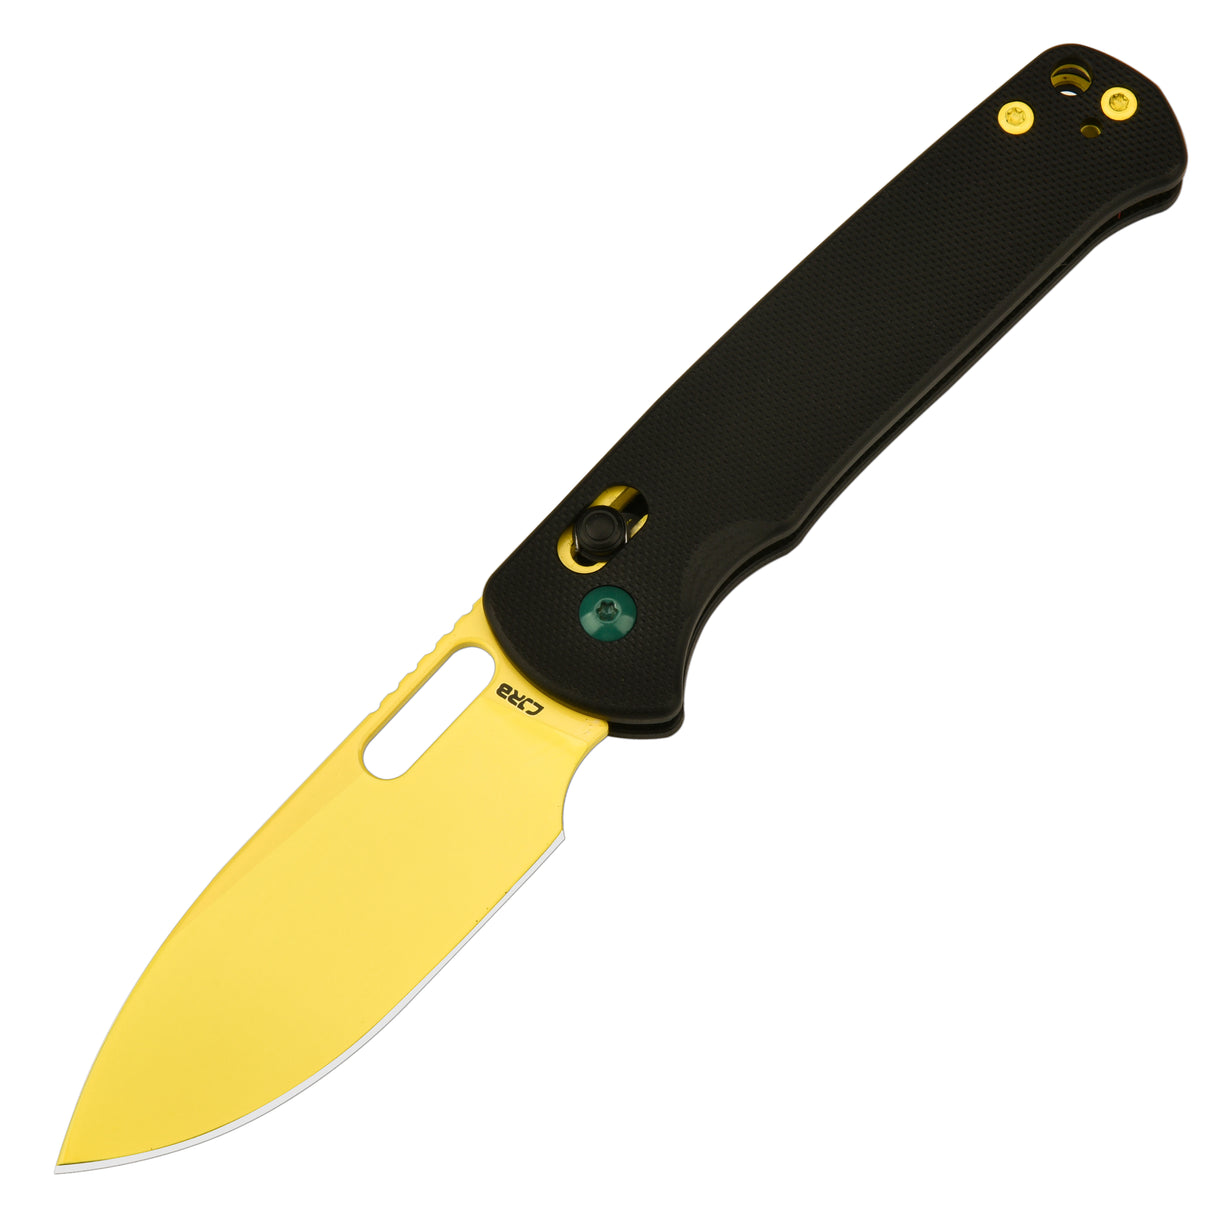 CJRB Hectare J1935(Paint Spraying) AR-RPM9 Steel Blade G10 Handle Folding Knives